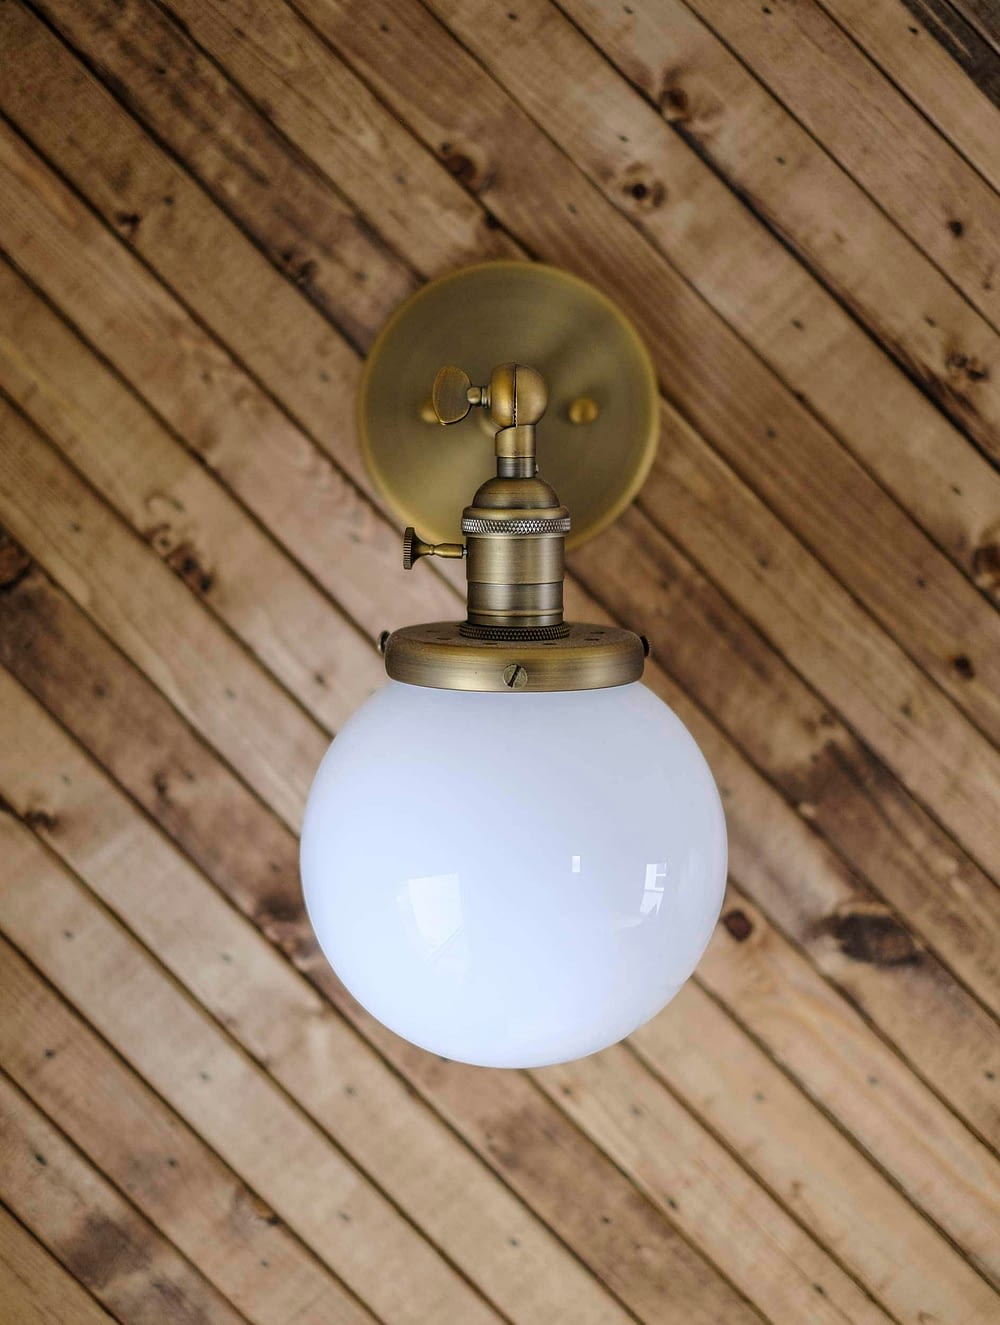 Brass wall sconce with globe light shade